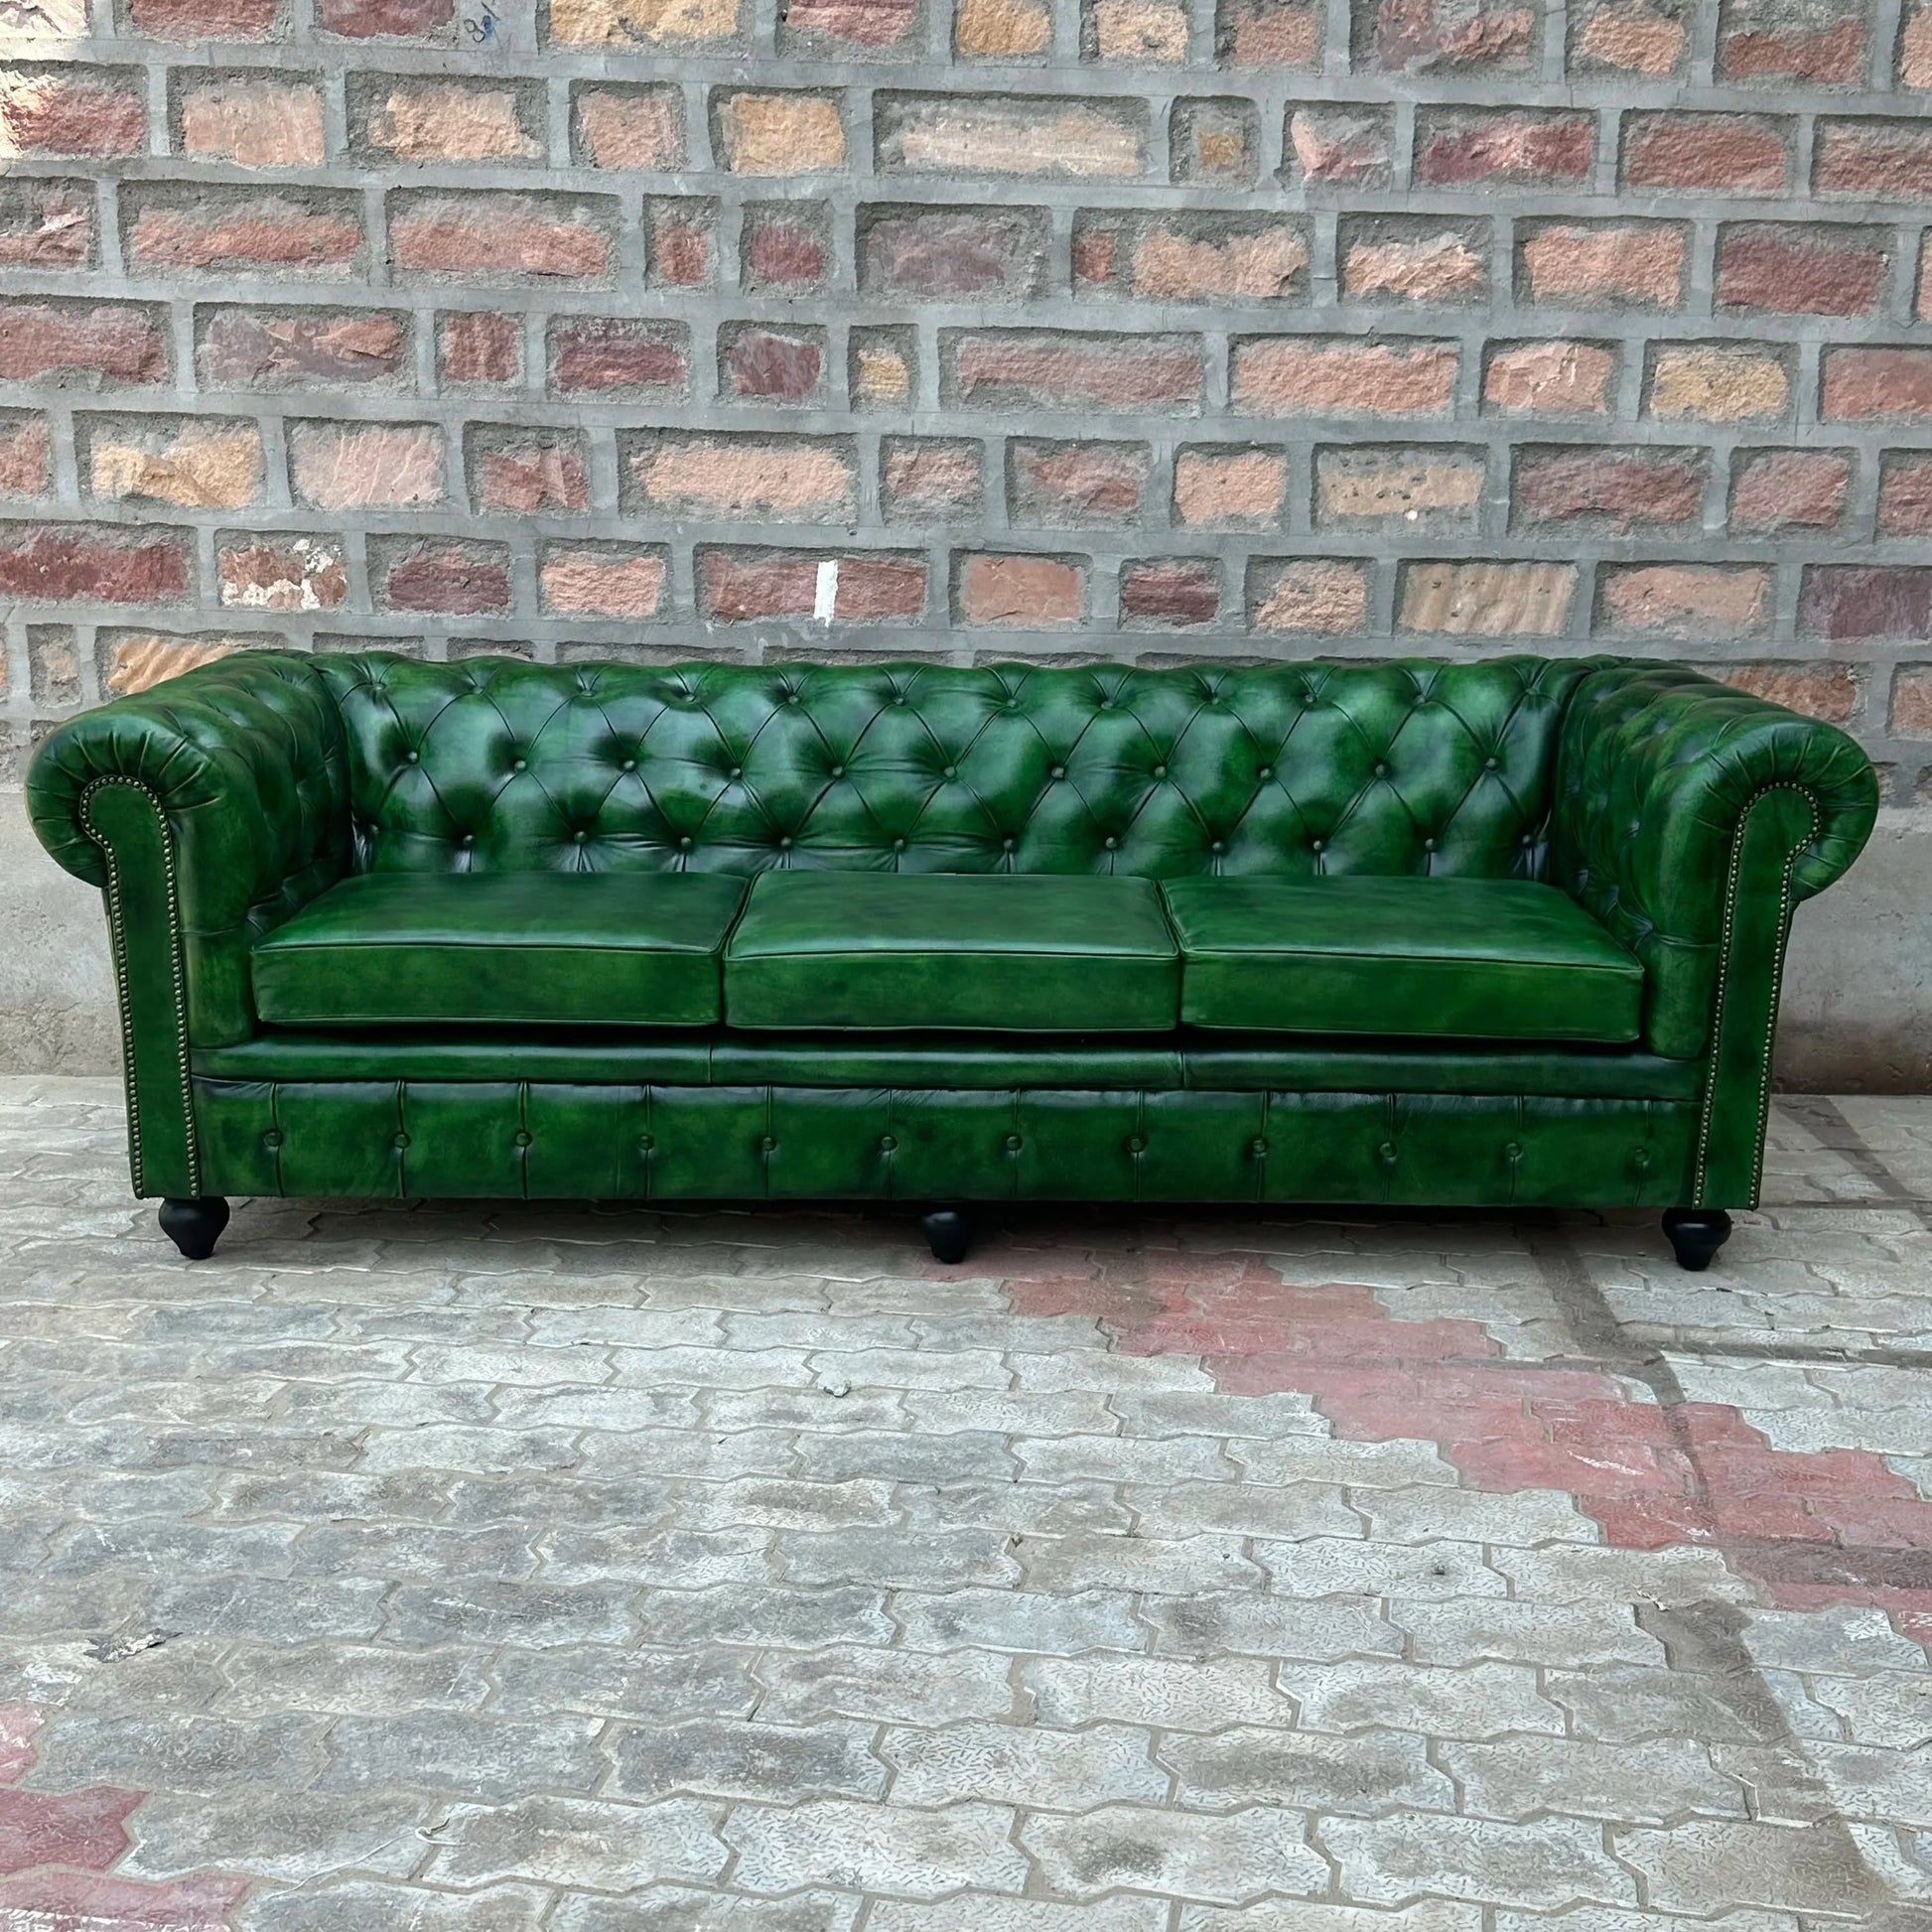 95" Sofa Normal Cushions | Polo Green Chesterfield Leather Sofa with Normal Cushions (PG-4C) by Rising Tide Design Co.